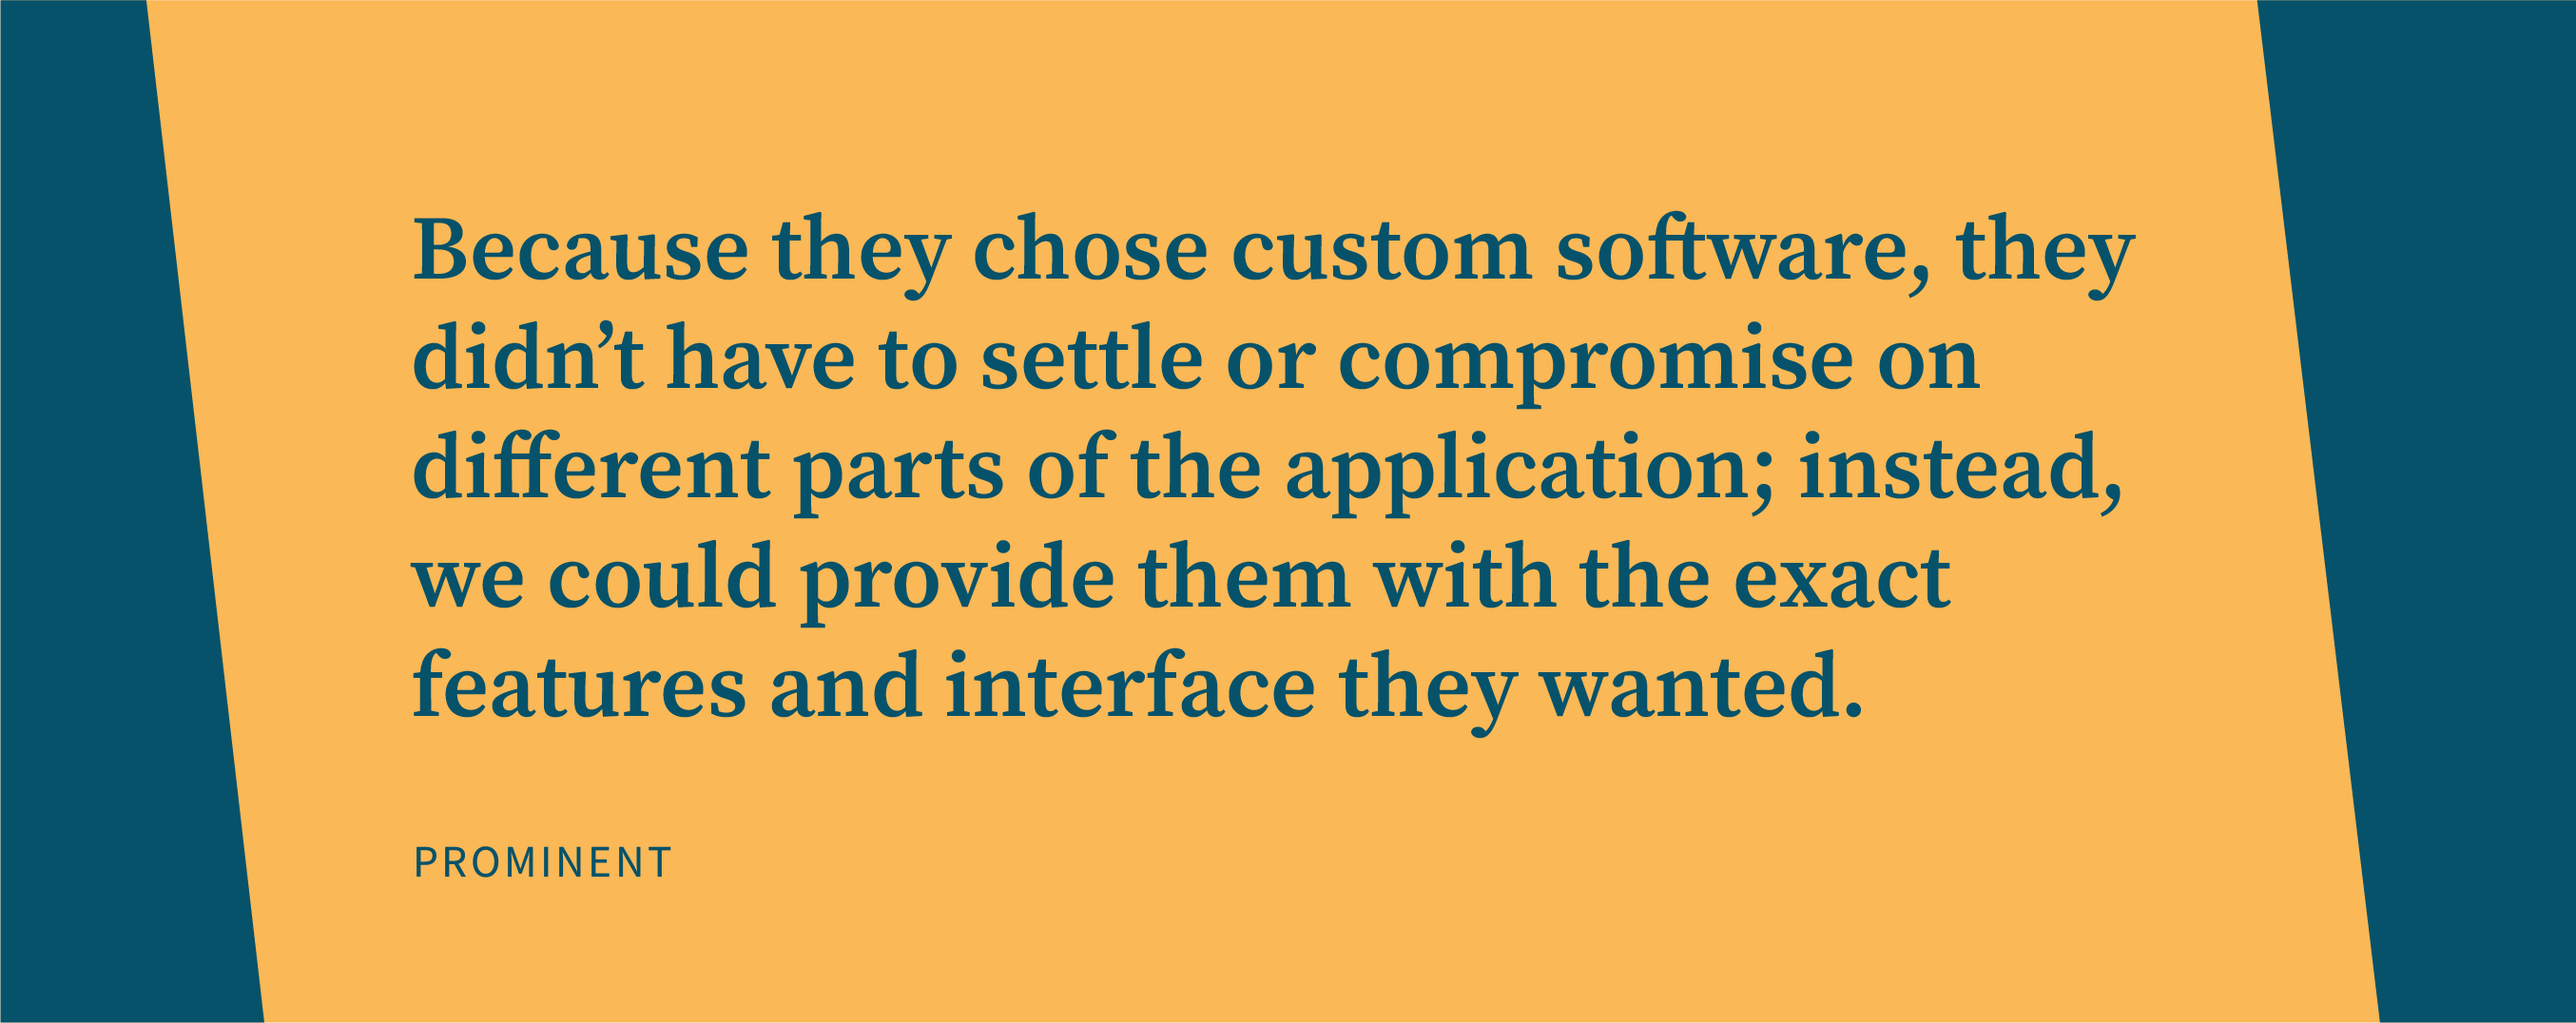 Because they chose custom software, they didn’t have to settle or compromise on different parts of the application; instead, we could provide them with the exact features and interface they wanted.